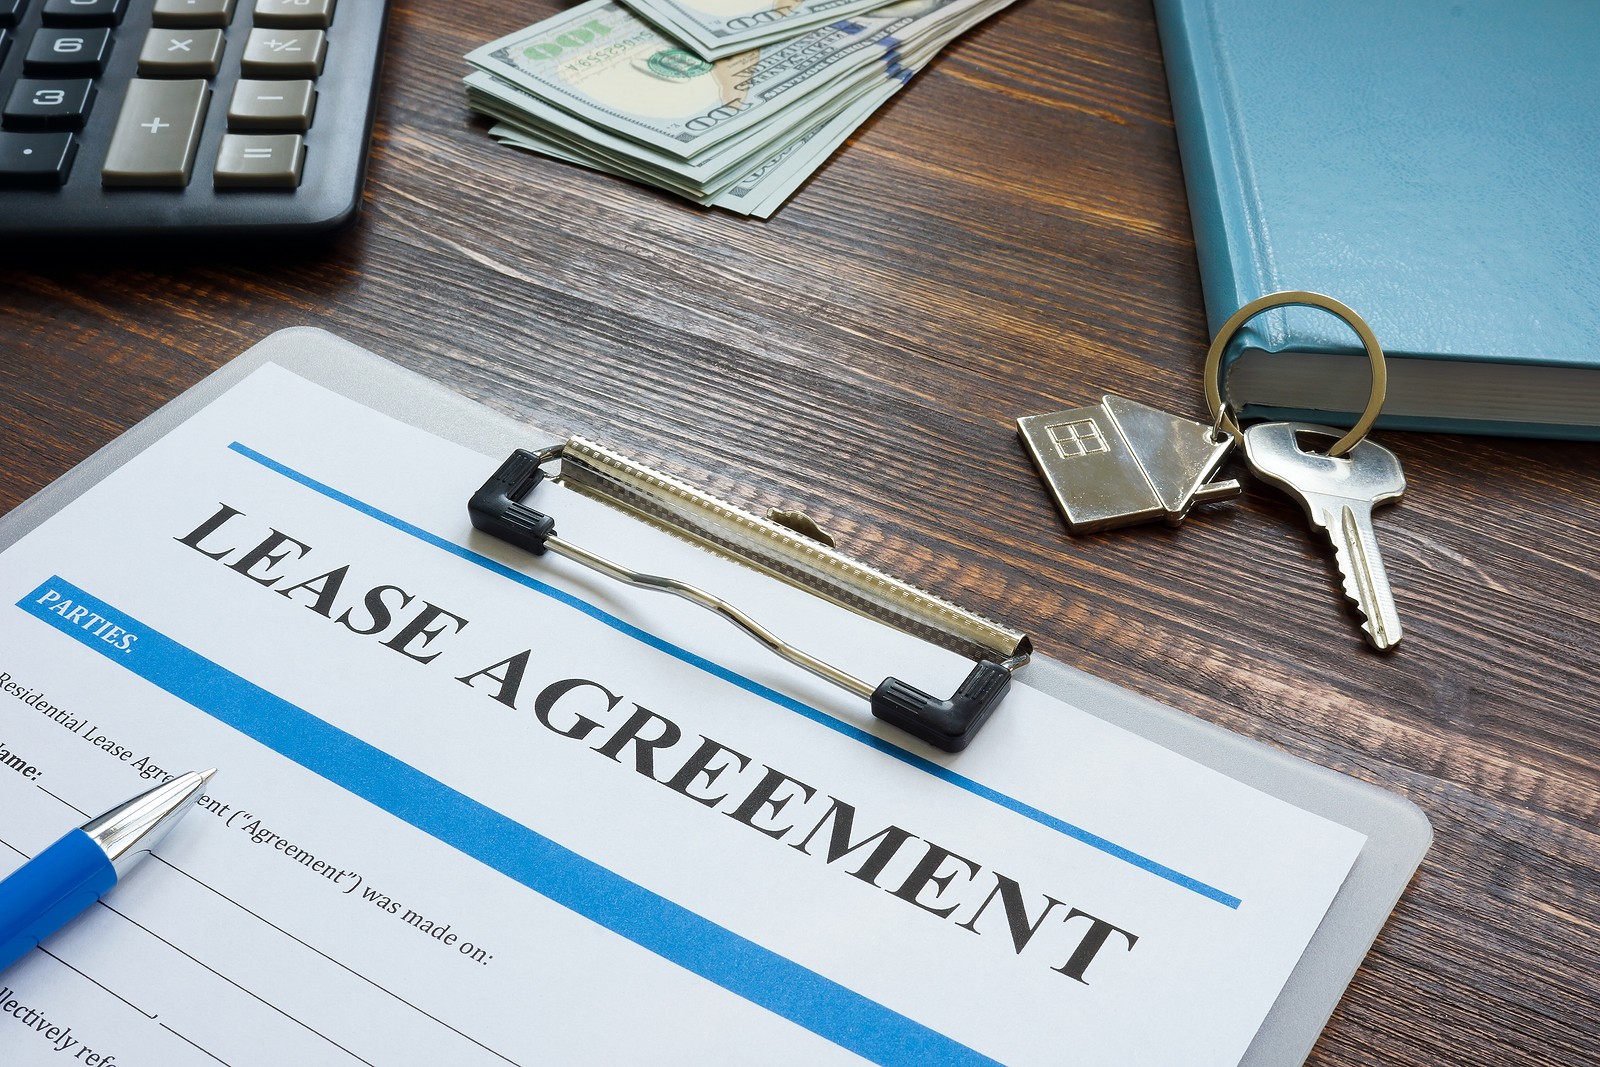 lease-agreement